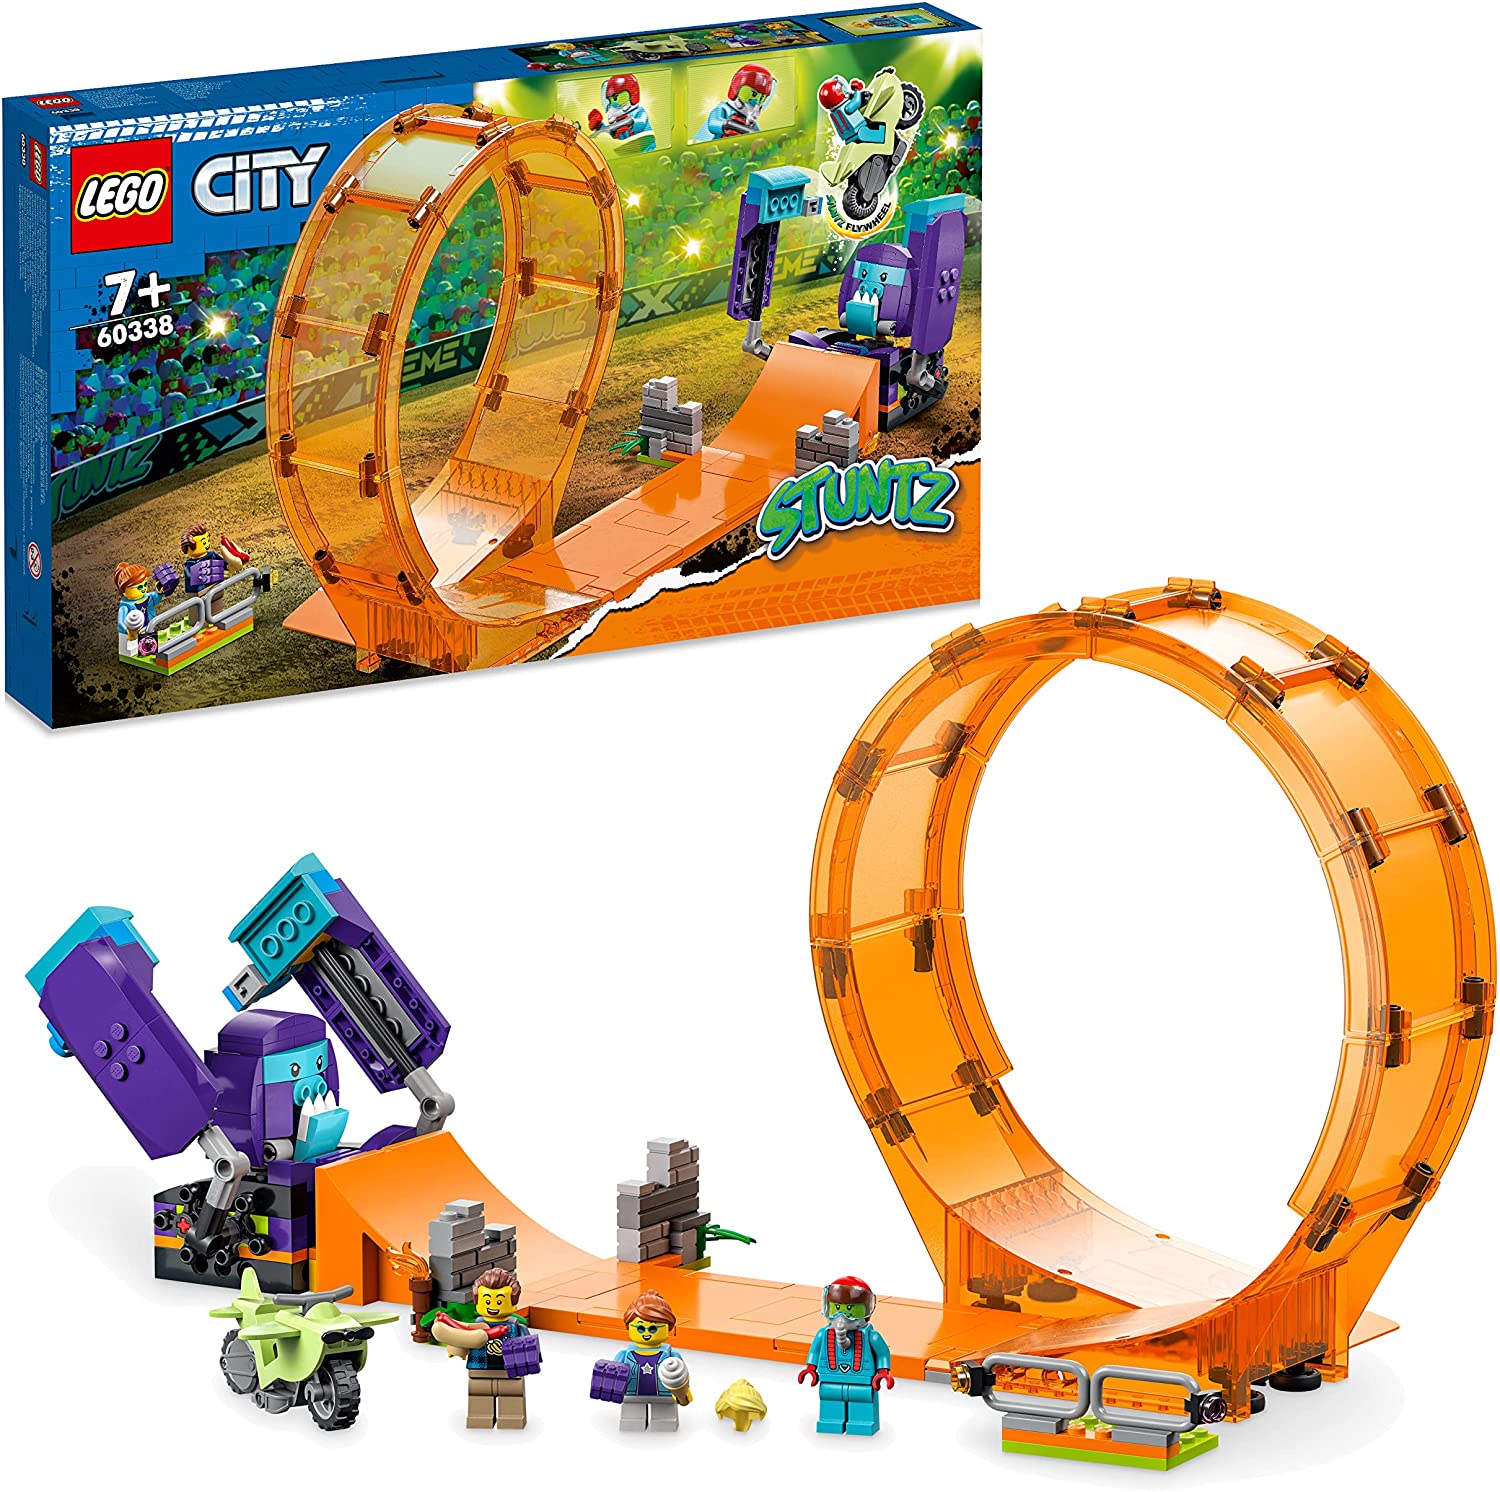 LEGO 60338 City Stuntz Chimpanzee Stuntlooping, Action Toy with Ramp, Stunt Motorcycle and 3 Mini Figures for Children from 7 Years